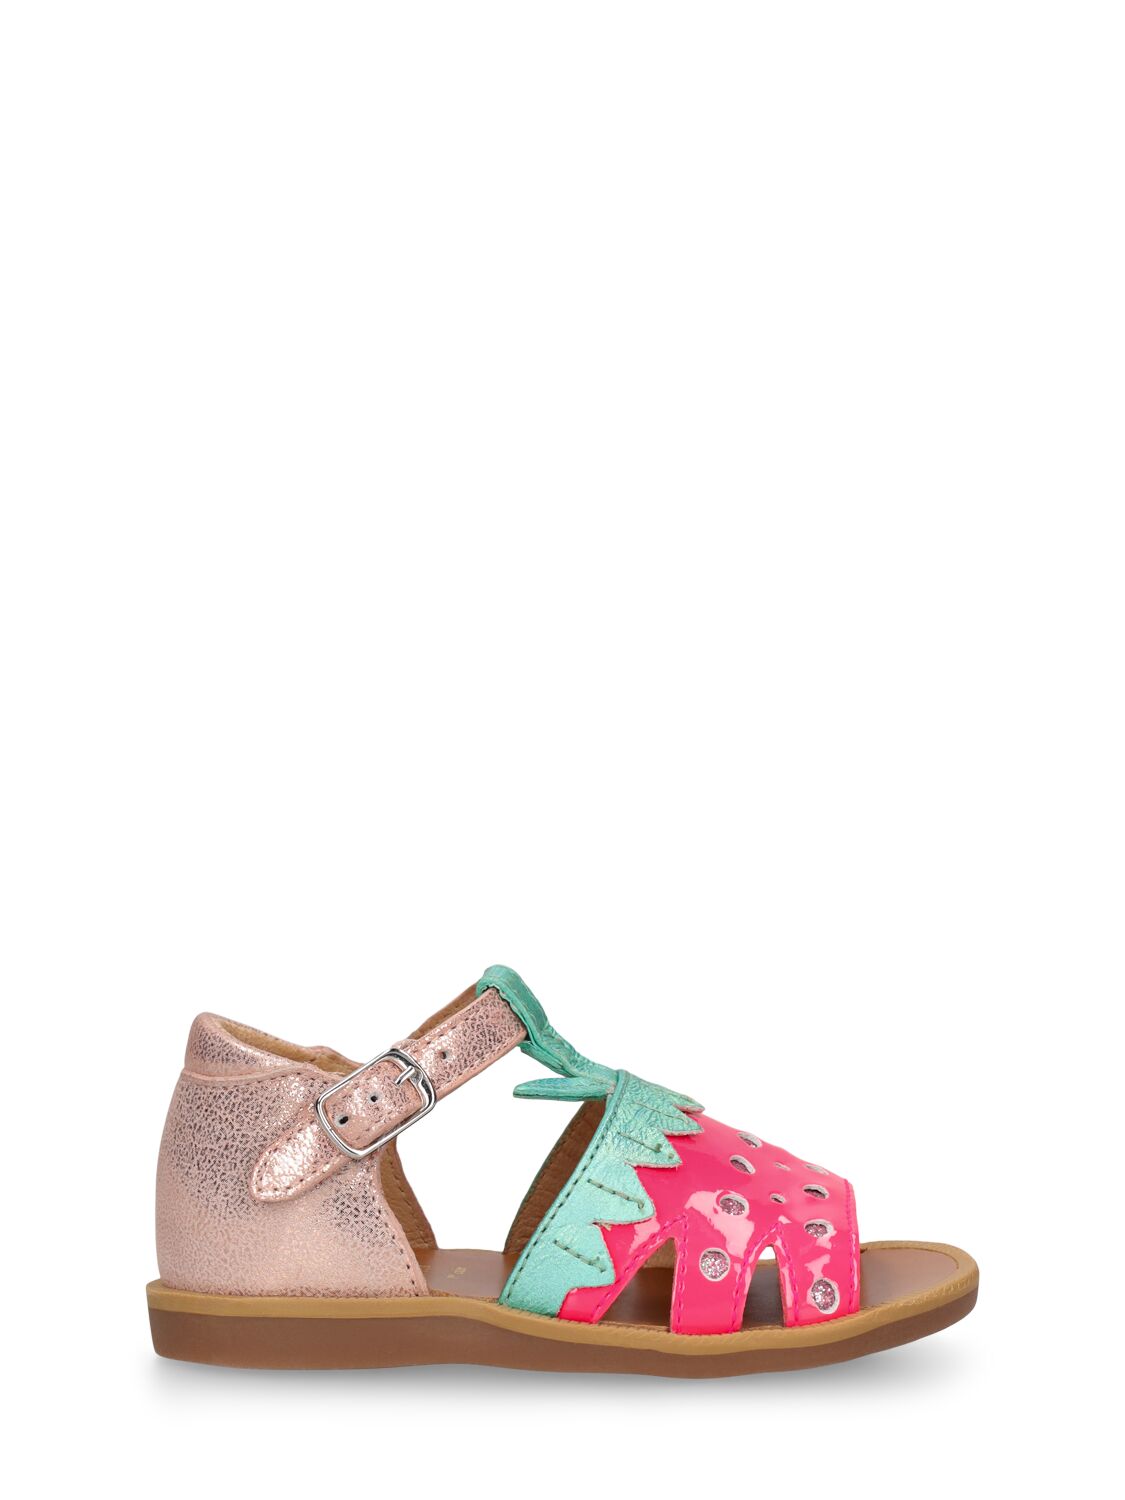 Shop Pom D'api Patent Leather Sandals W/ Flowers In Pink,red